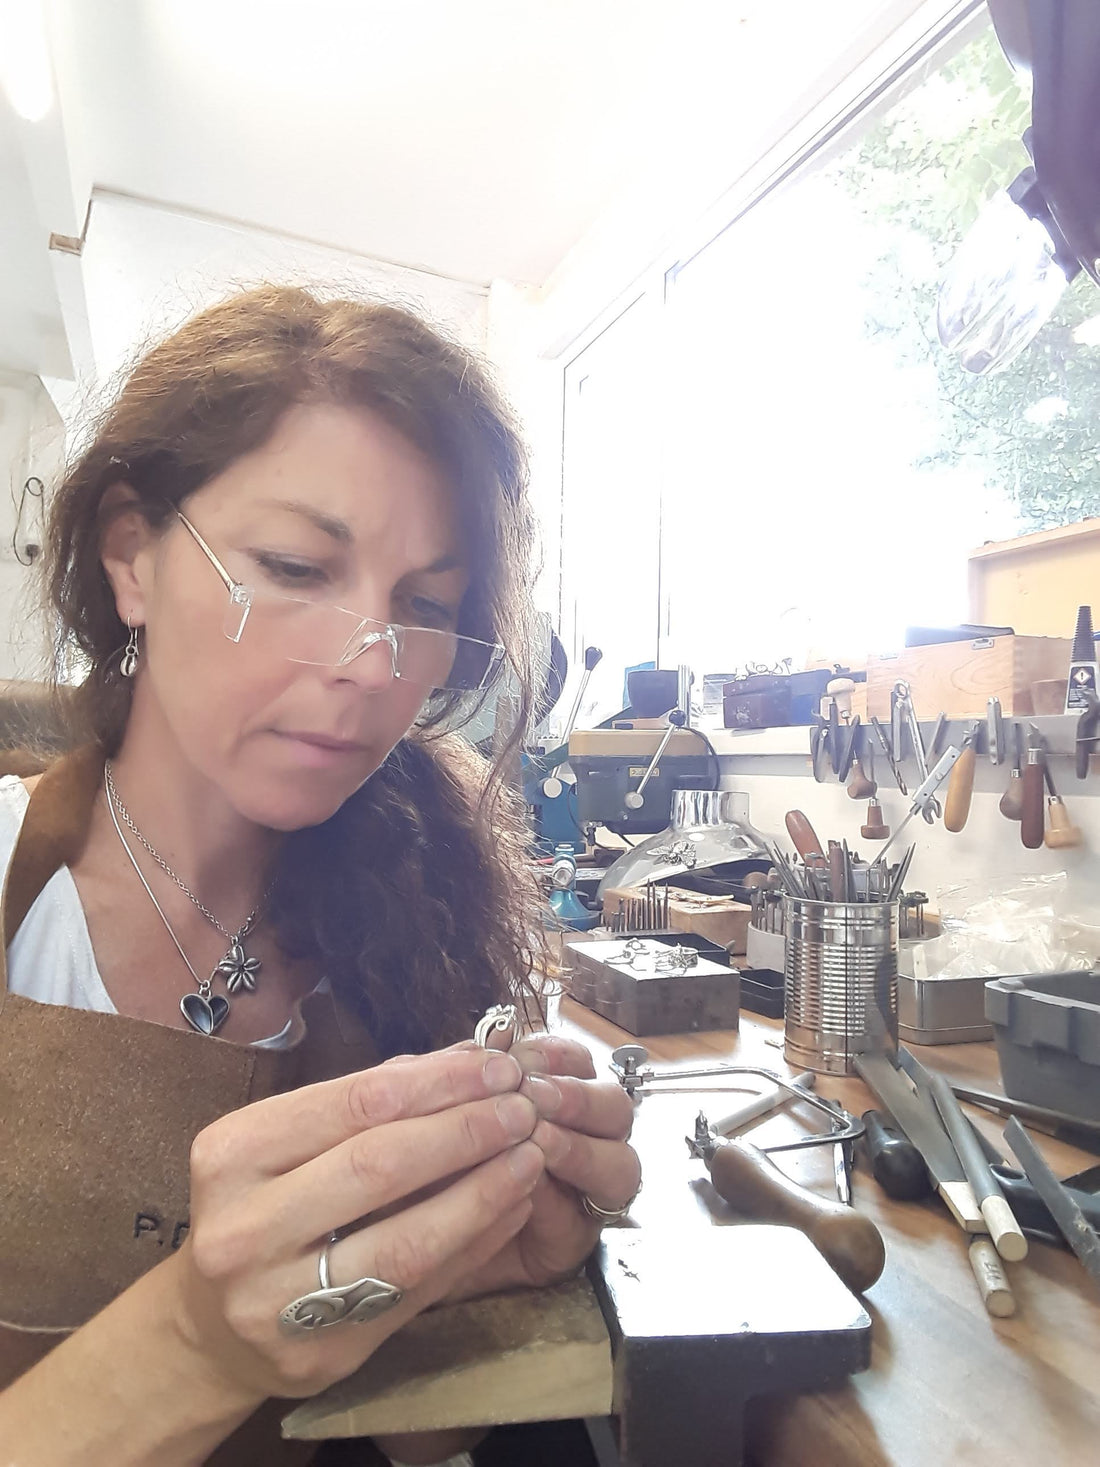 Gower silversmith. My inspiration and How it's made.